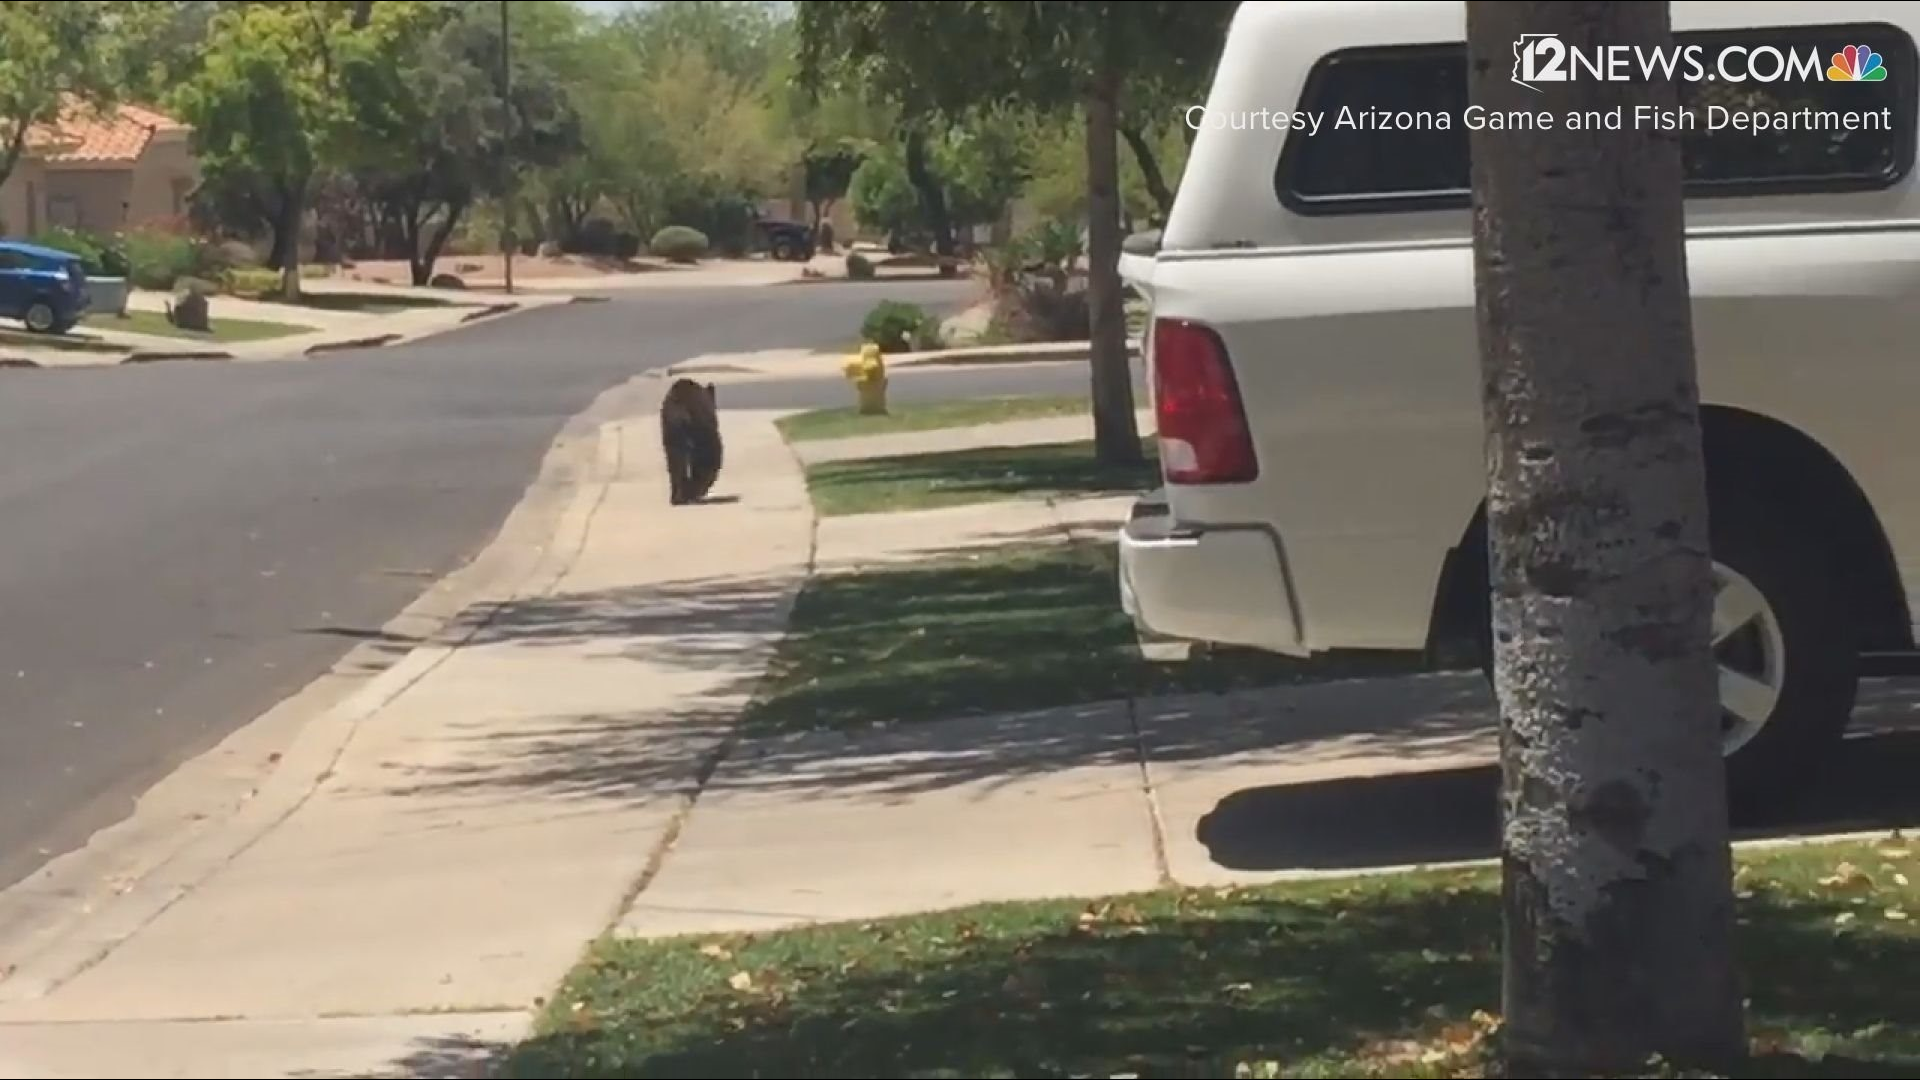 Game and Fish said this was not a public safety issue and the bear was "not a nuisance."